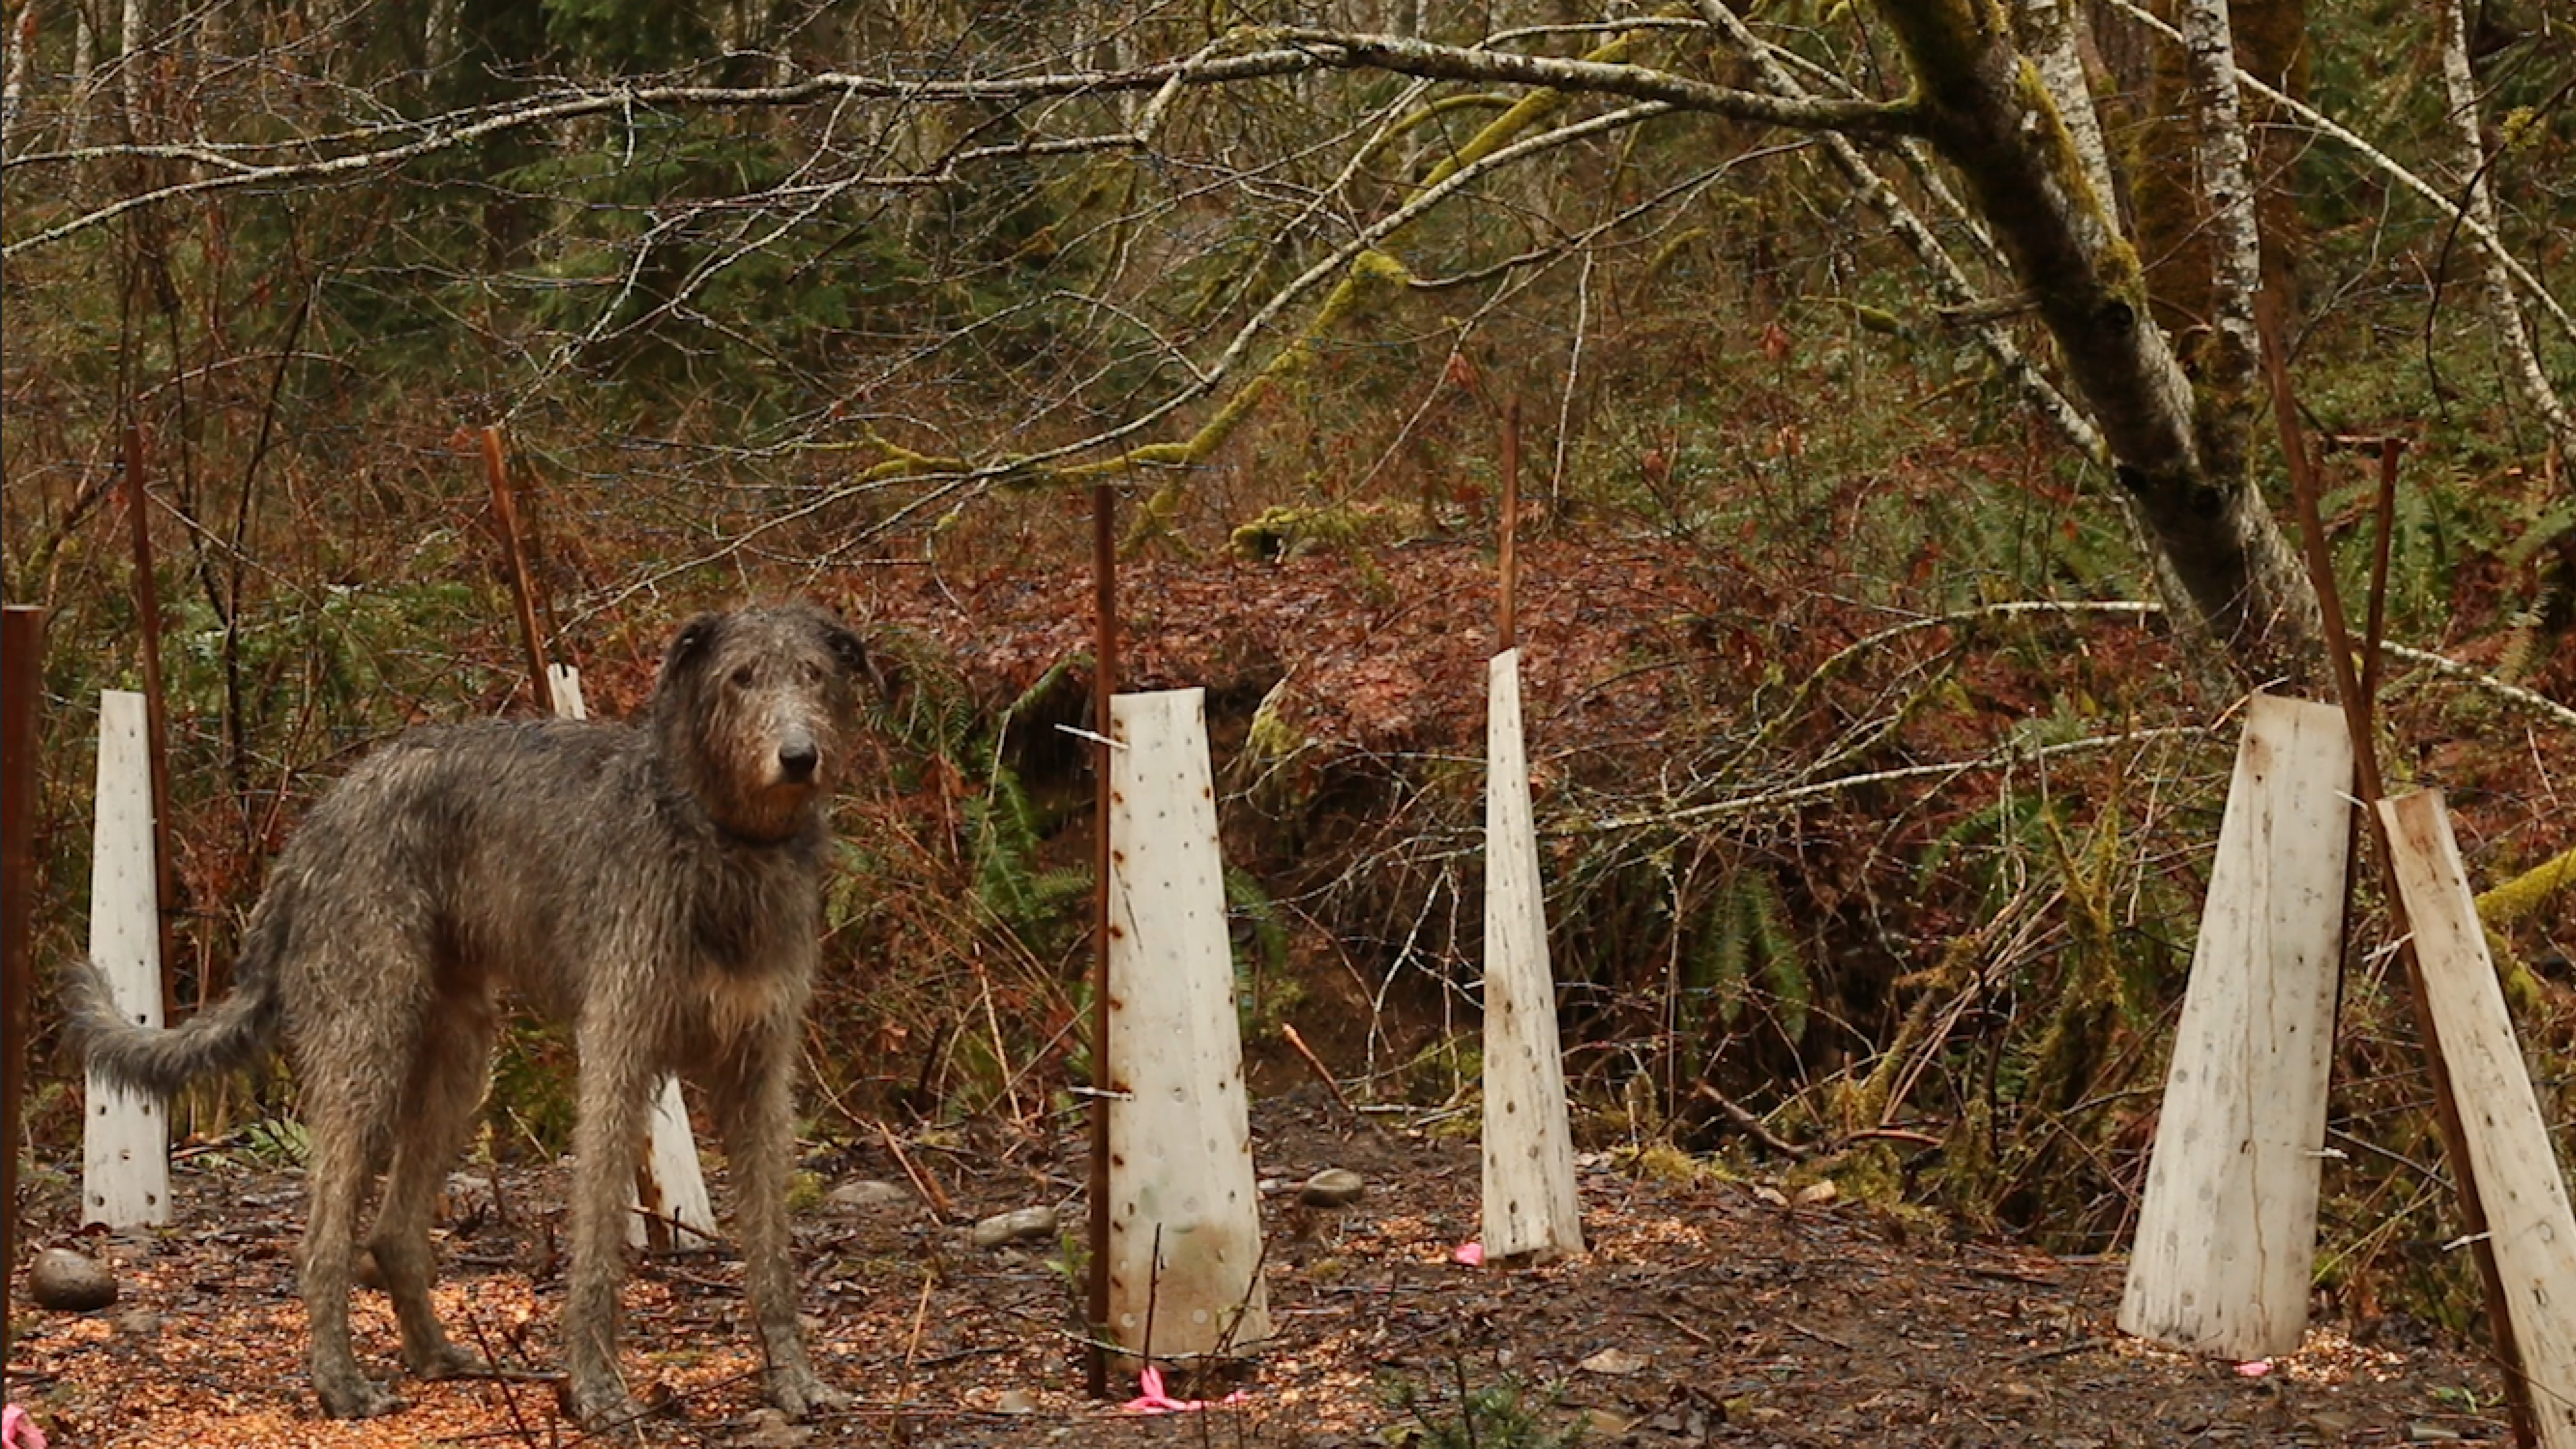 Riparian area newly planted, with a large Irish wolfhound posing.